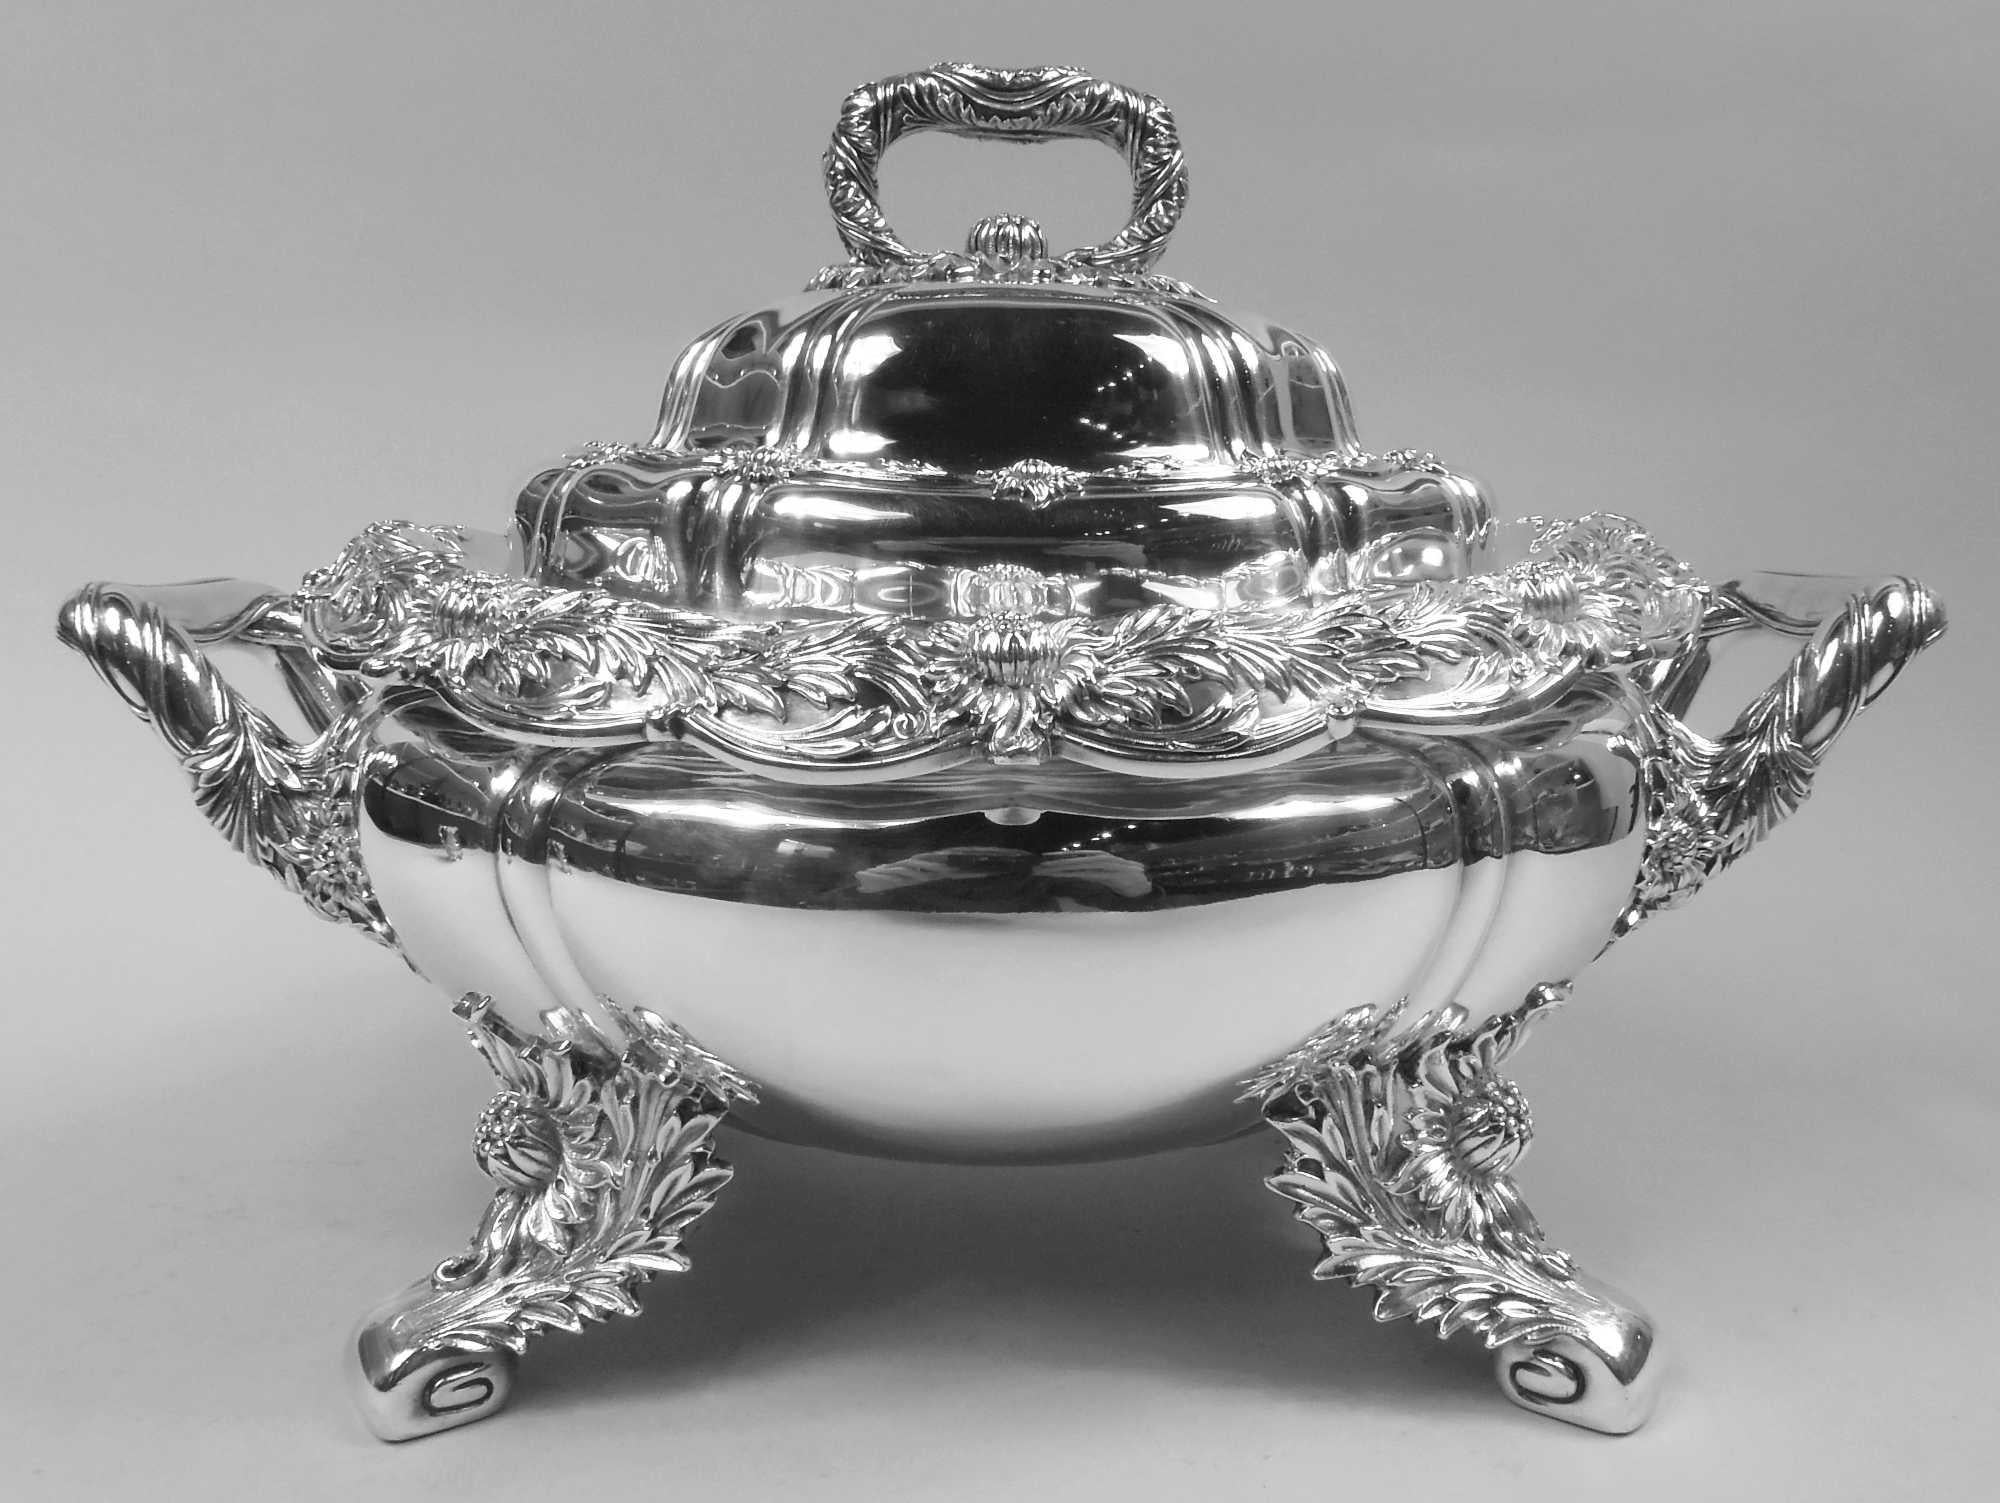 Rare Chrysanthemum sterling silver soup tureen. Made by Tiffany & Co. in New York. Lobed and oval bowl with scalloped and turned down scalloped rim. Bracket end handles and four splayed volute supports. Cover double domed with bracket finial. Dense